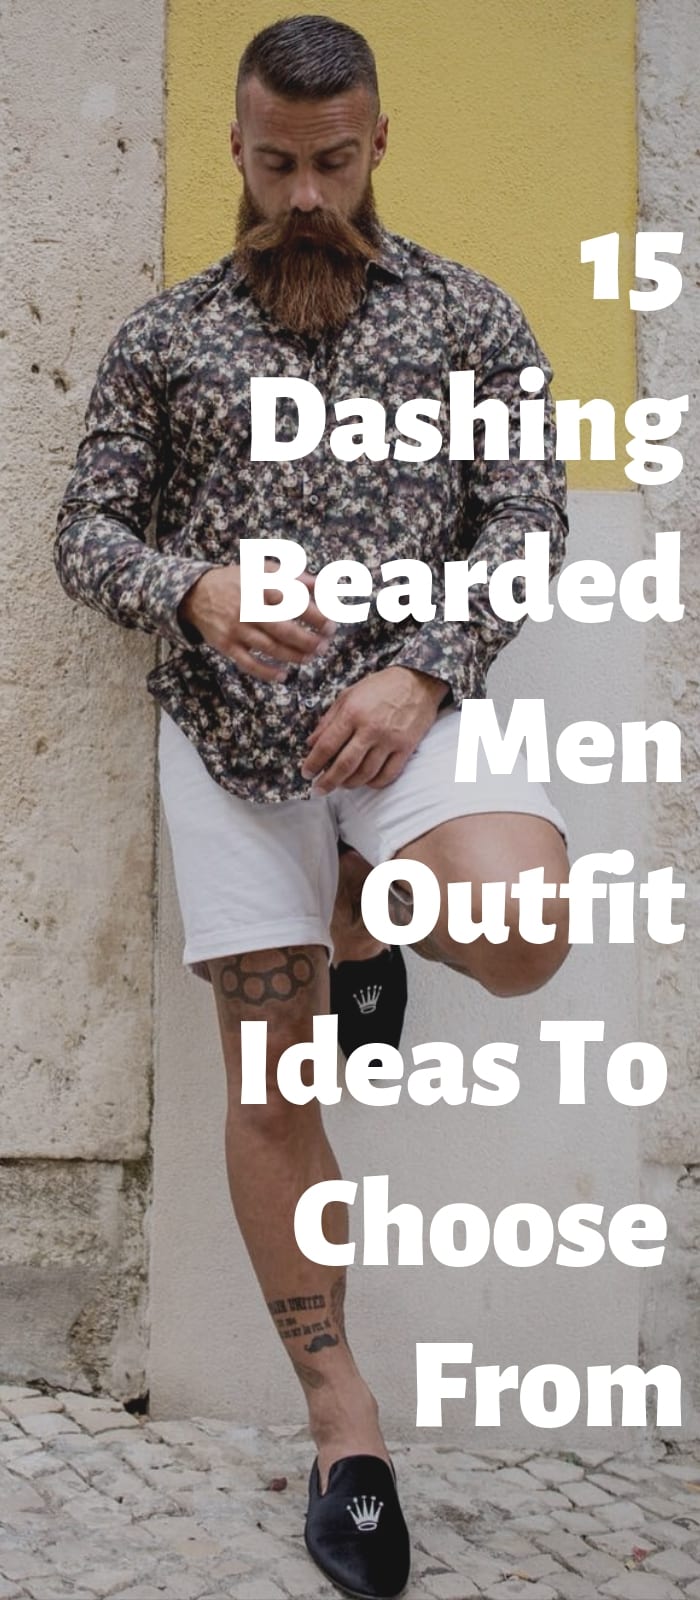 15 Dashing Bearded Men Outfit Ideas To Choose From